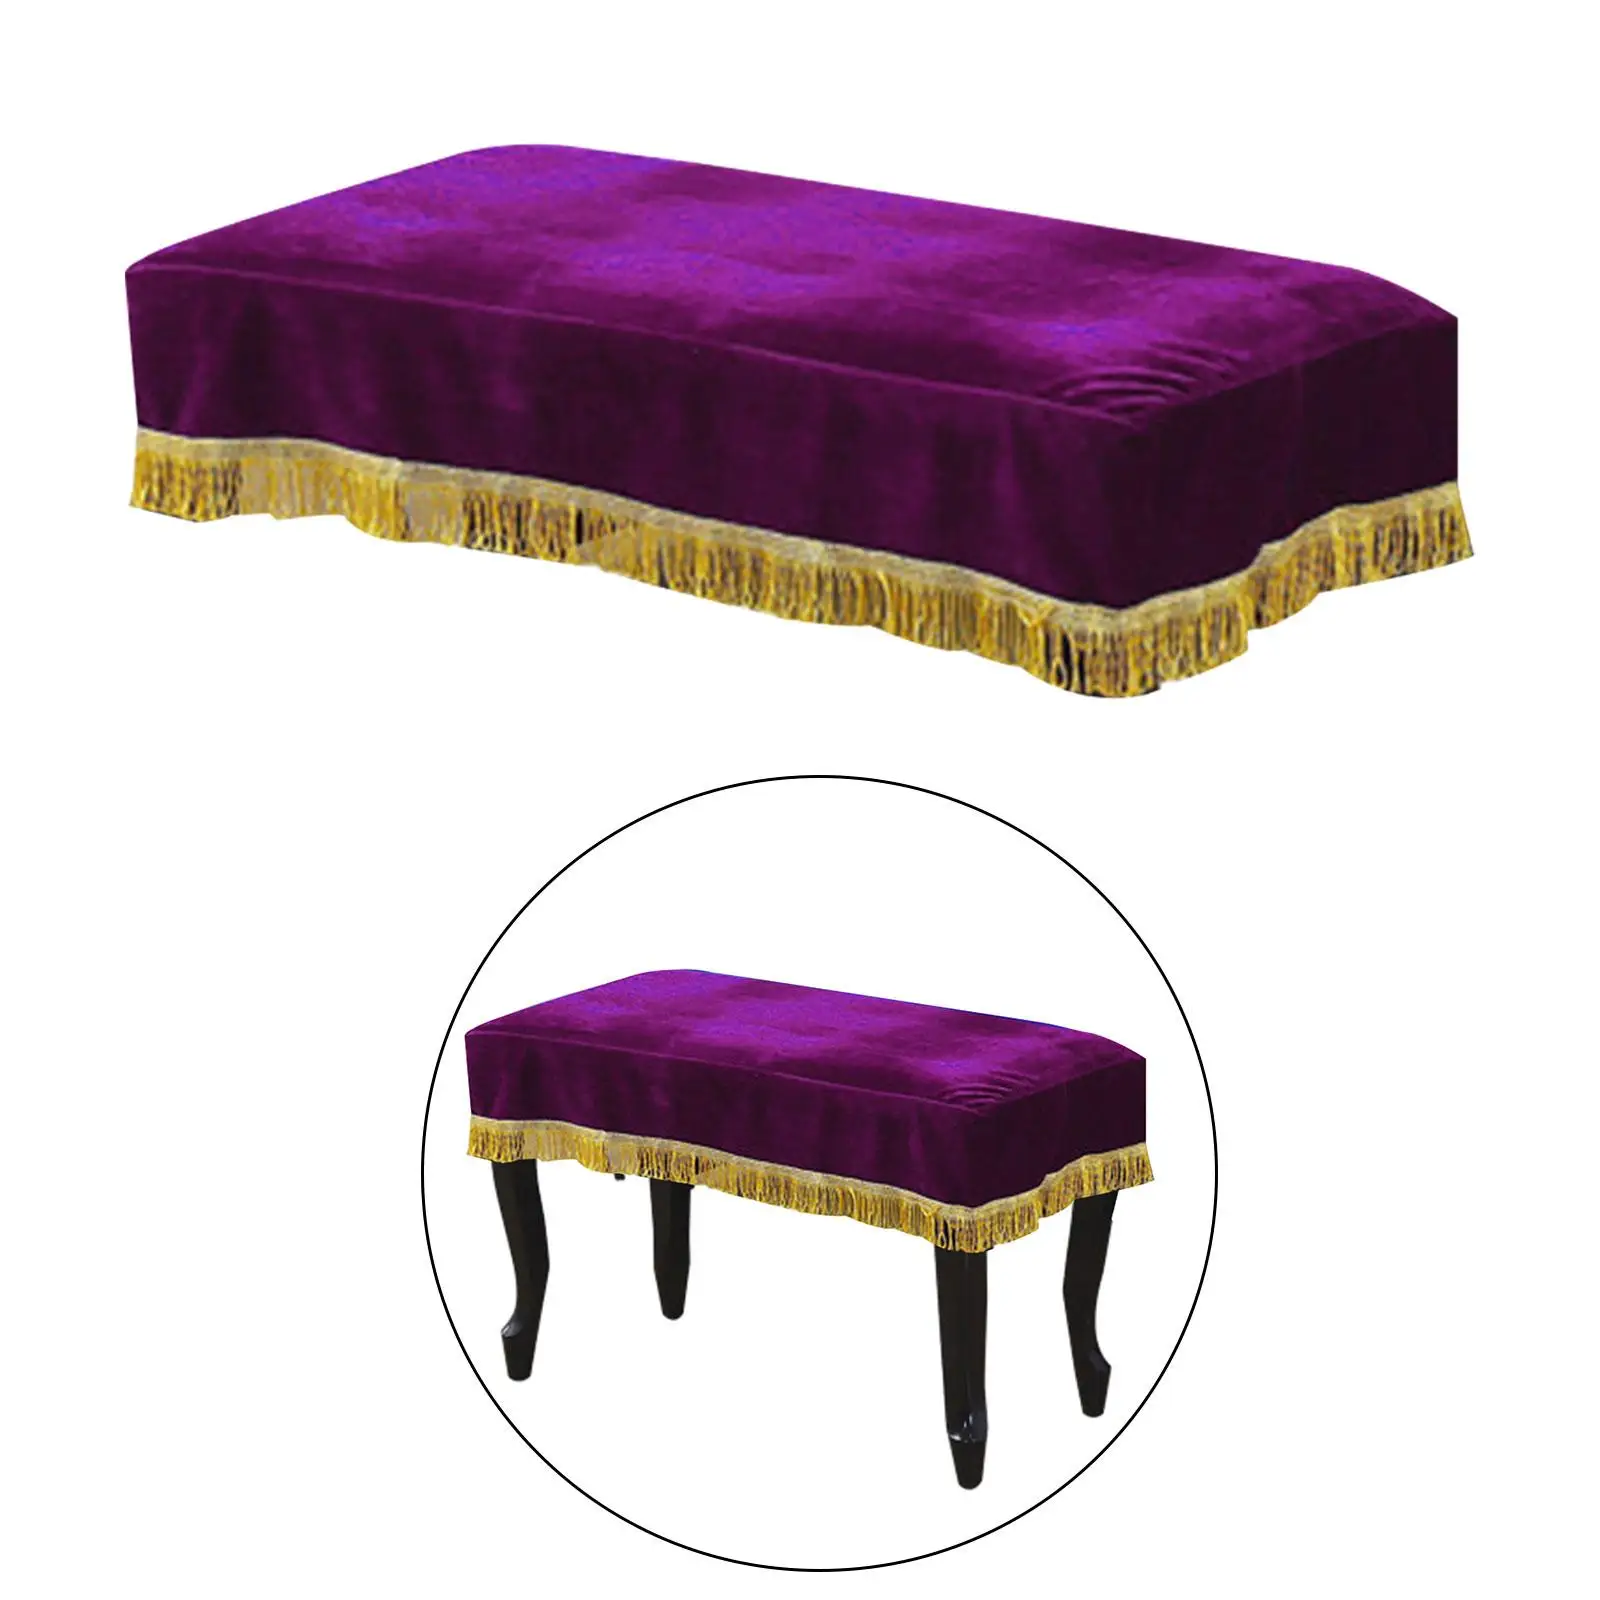 European Piano Bench Cover Fashionable Dustproof Exquisite Dust Cover Bench Slipcover for Household Bar Living Room Home Office